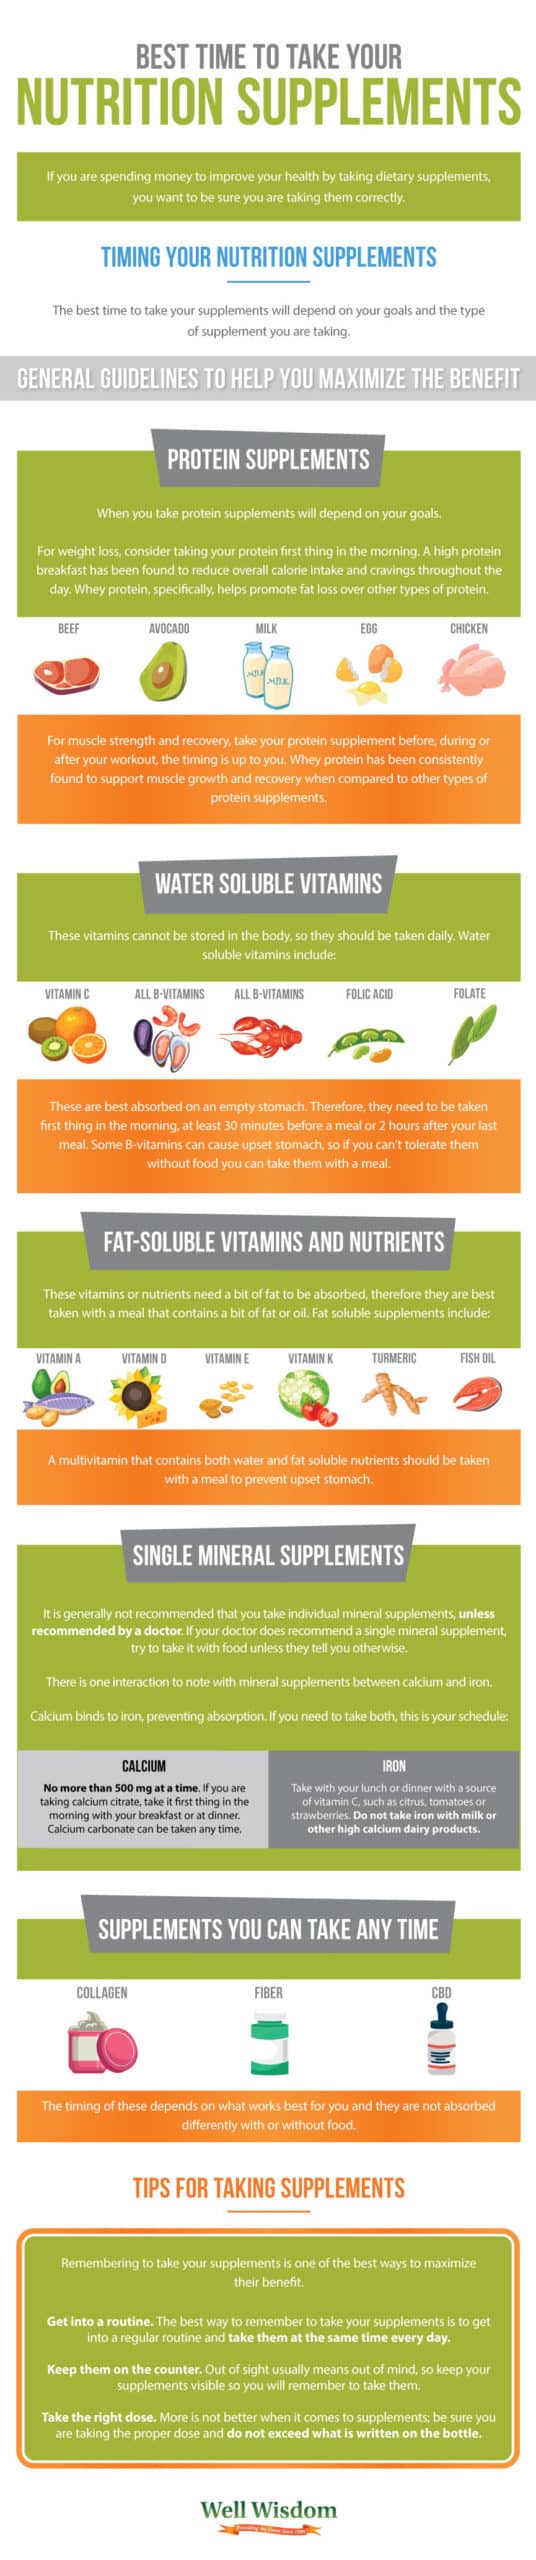 Best Time to Take Your Nutrition Supplements Infographic